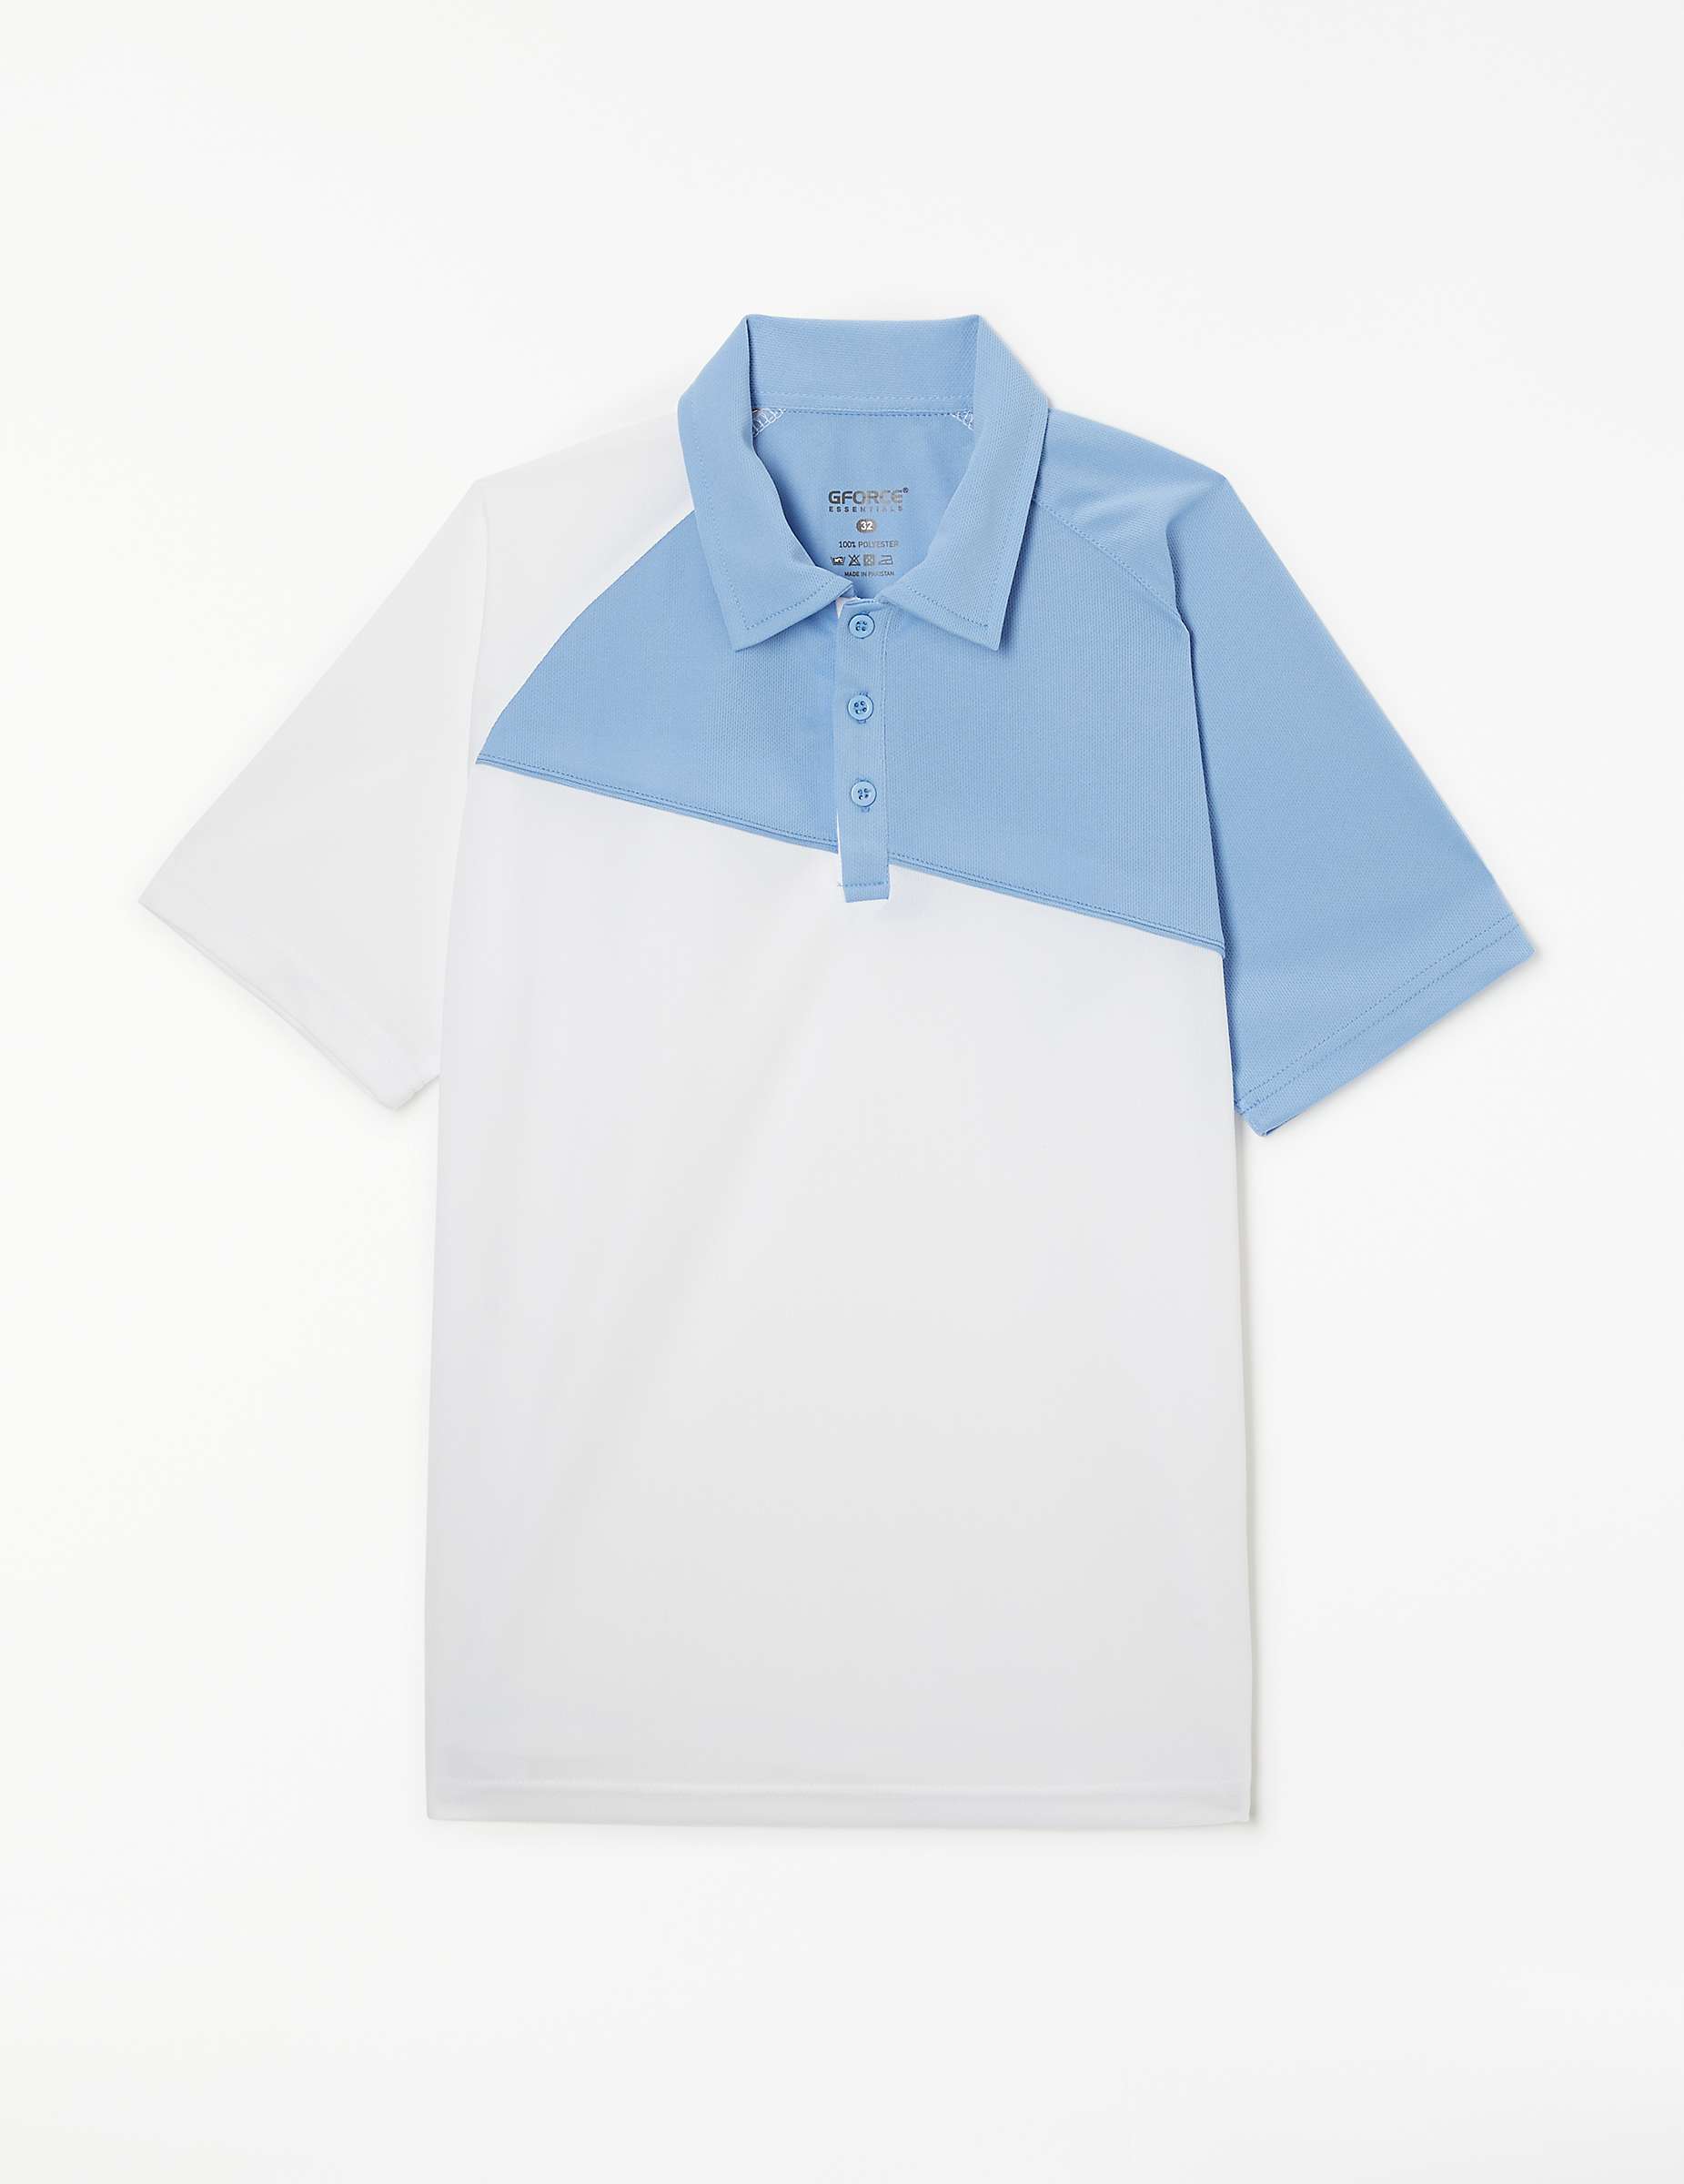 Buy Chigwell School Swallow's House Polo Shirt, White with Sky Panel Online at johnlewis.com